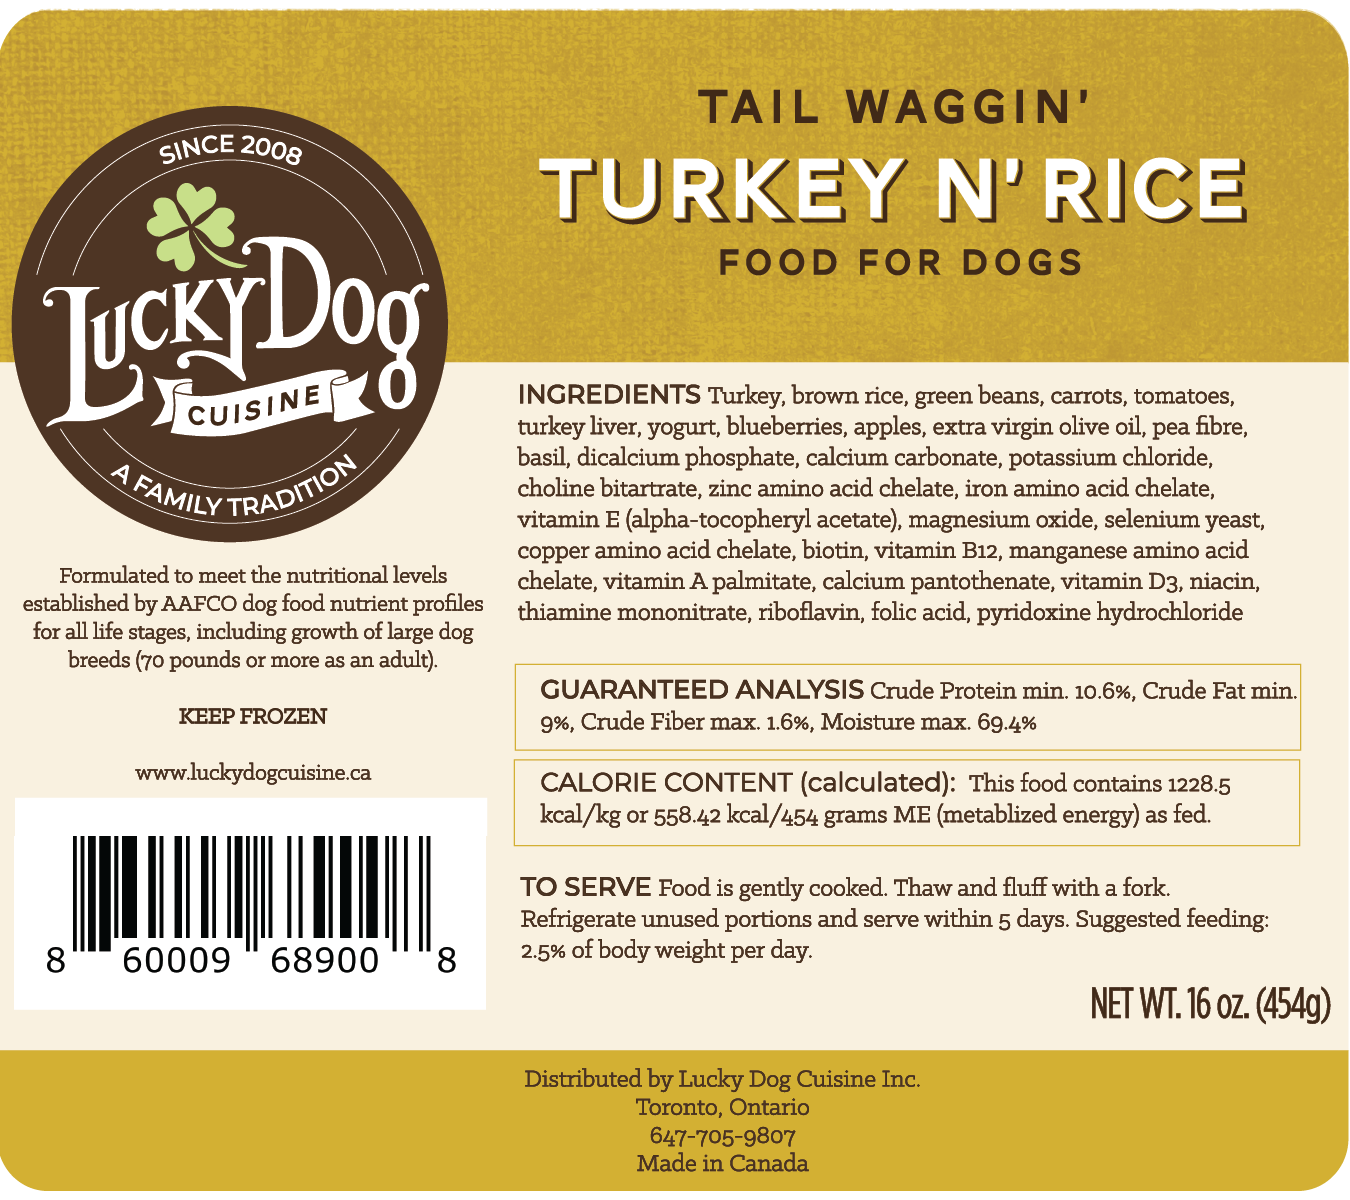 Turkey and rice label with ingredient list and guaranteed analysis